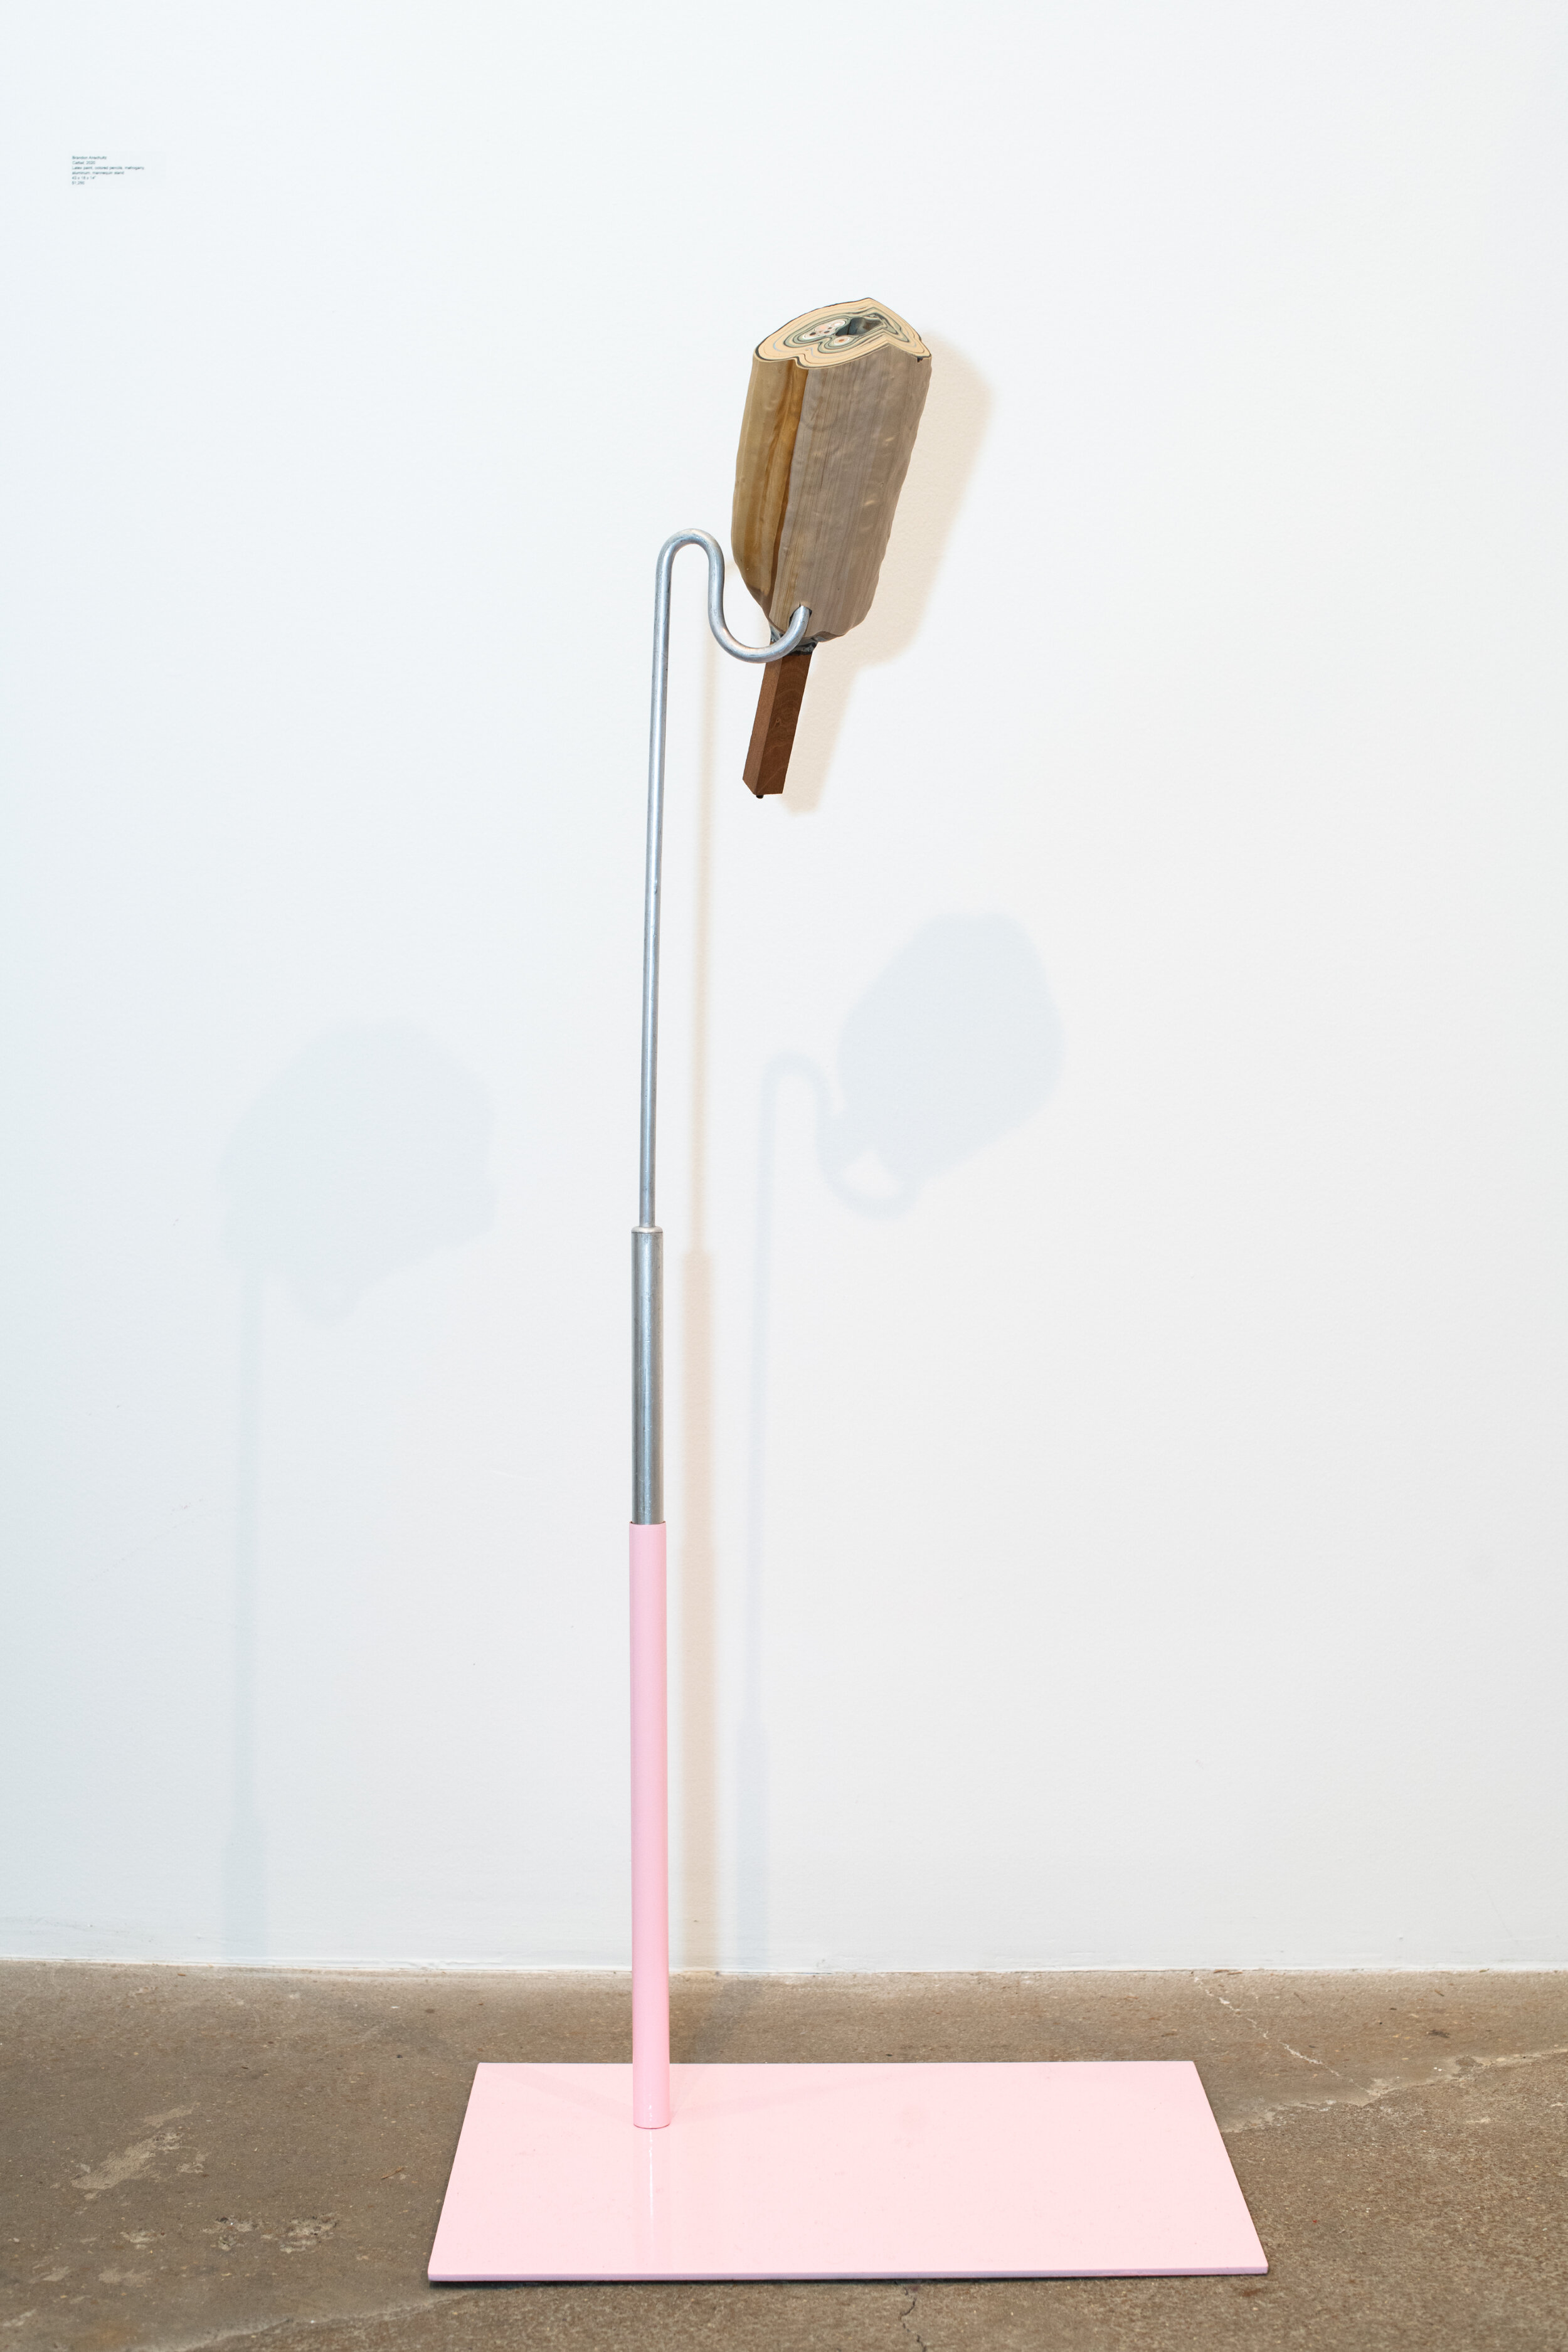  Brandon Anschultz   Cattail , 2020  Latex paint, colored pencils, mahogany, aluminum, mannequin stand  43 x 18 x 14 inches.  $1,250 